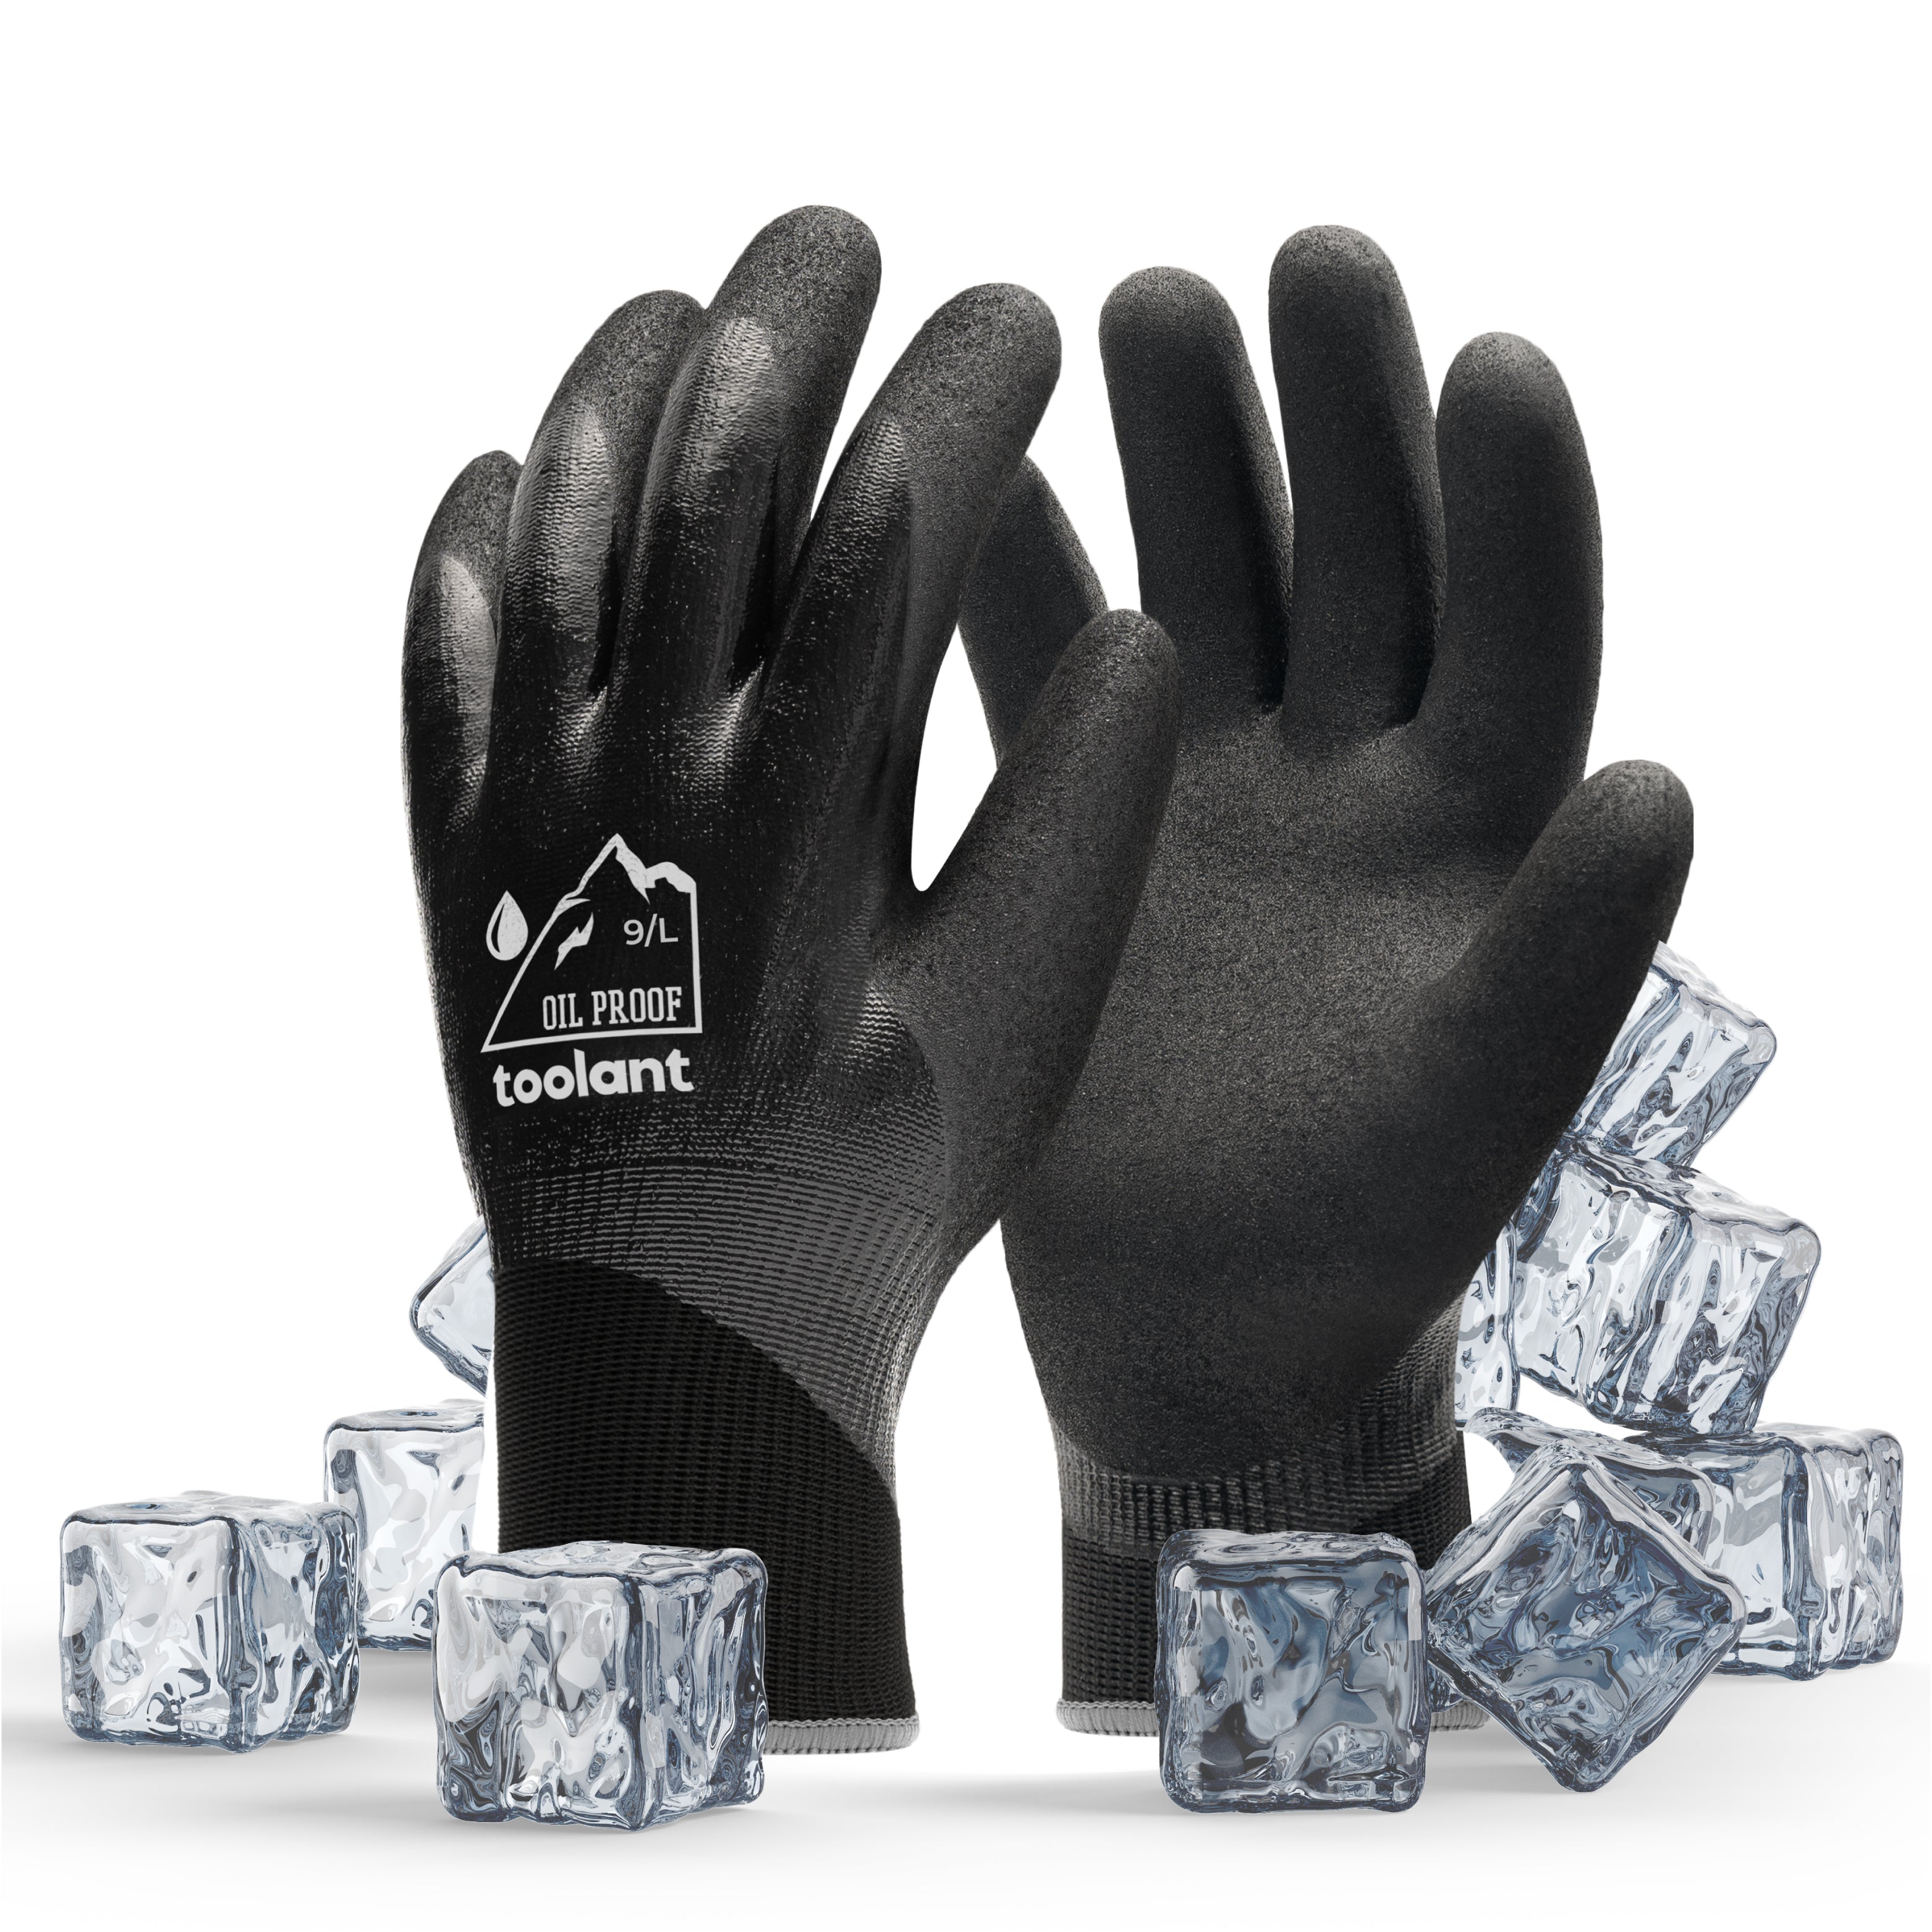 [Bulk Buy] 12 Pair Heavy Duty Winter Gloves, 100% Water Proof, Thermal Insulated Winter Dipped Gloves